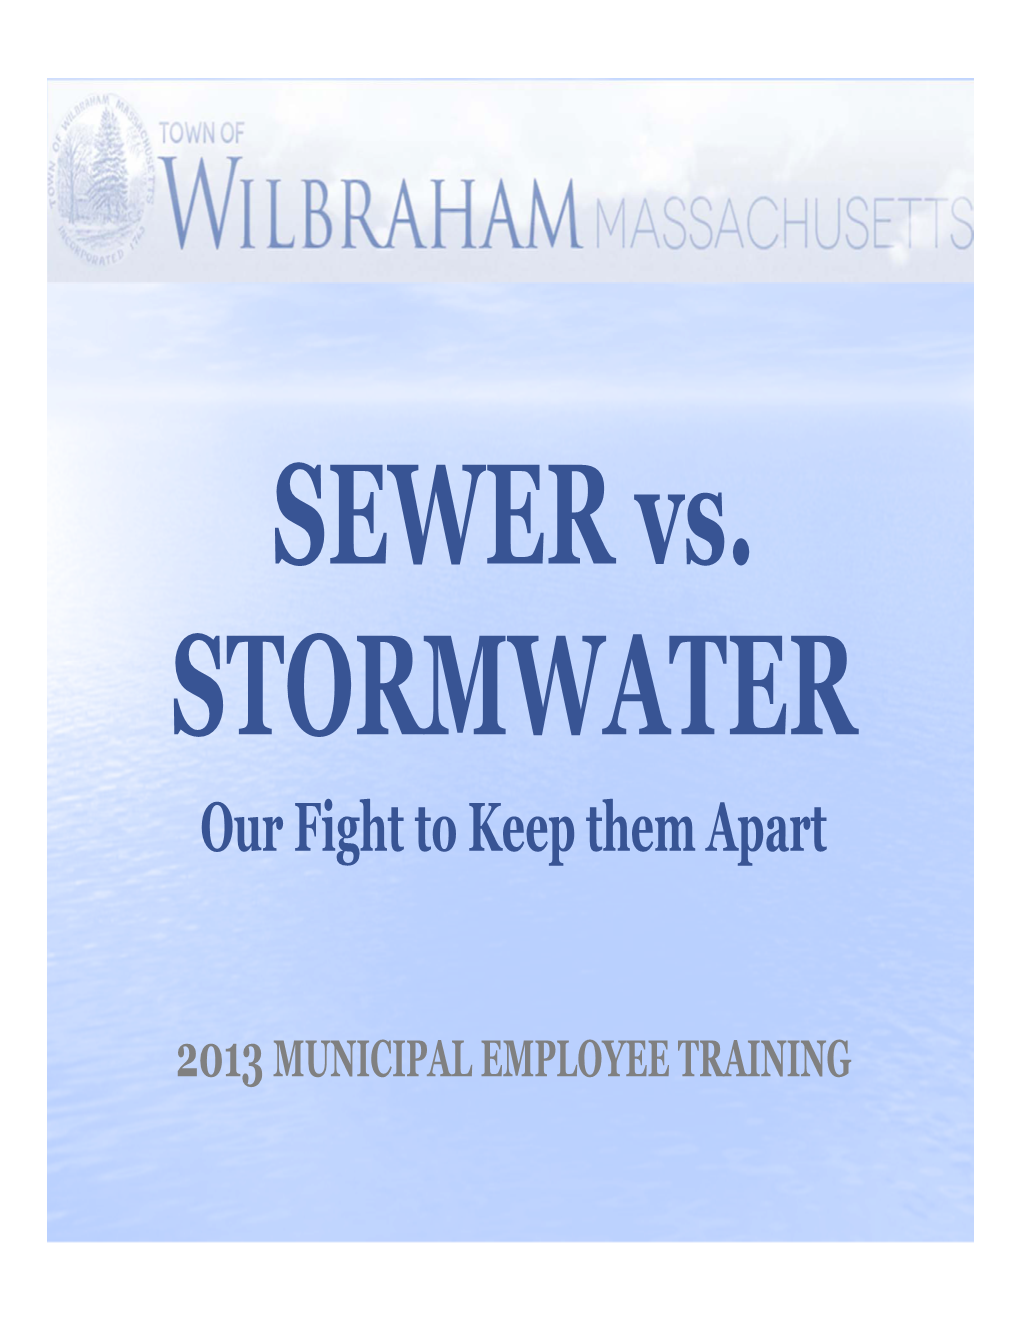 SEWER Vs. STORMWATER Our Fight to Keep Them Apart